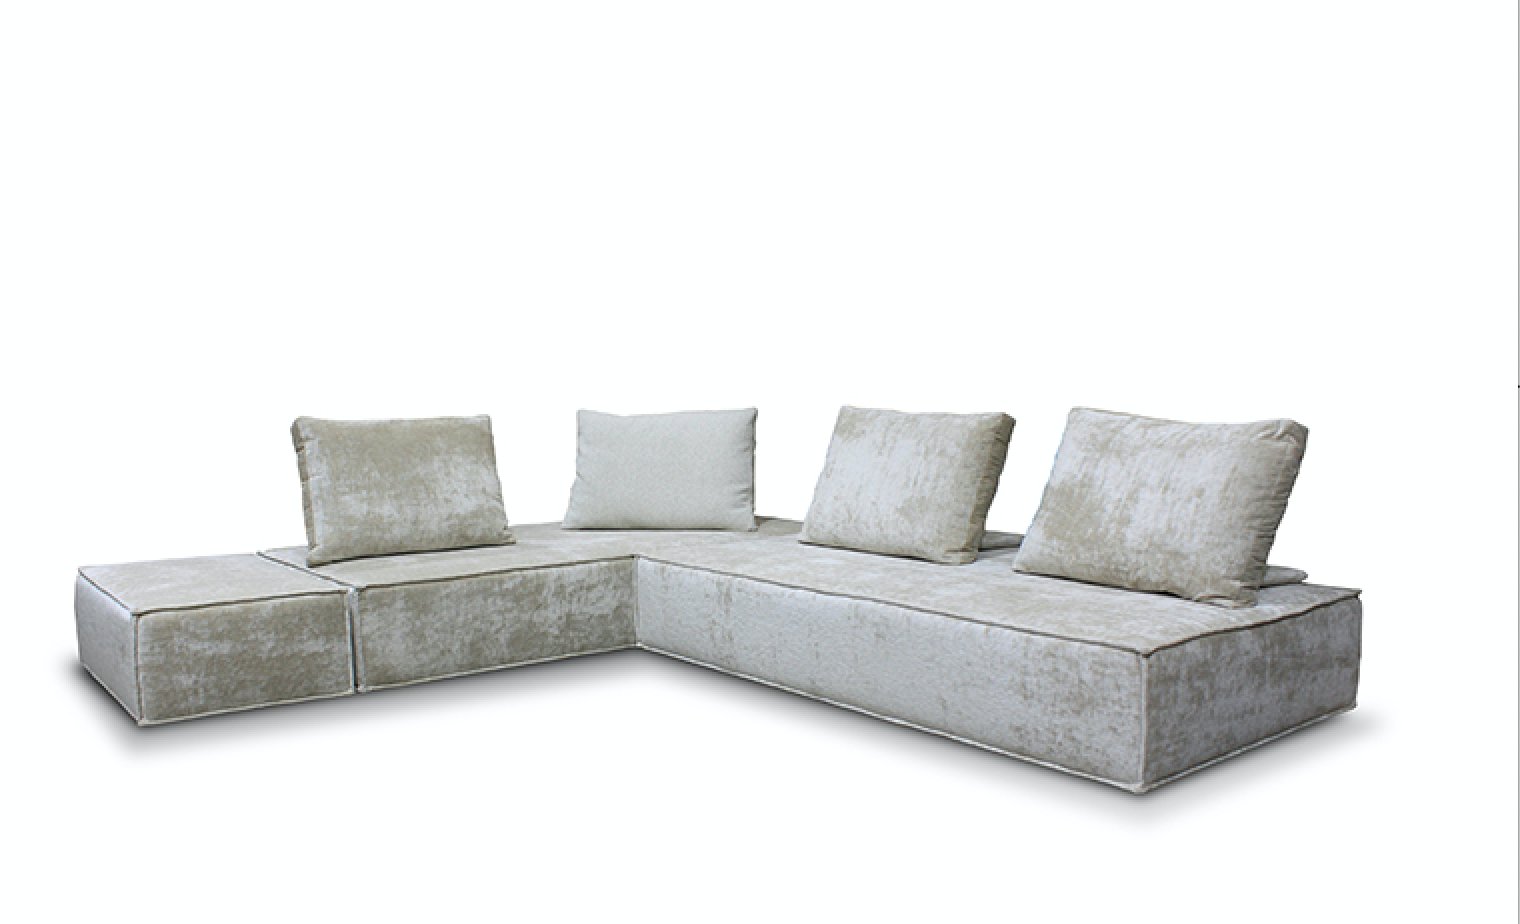 TULUM CHILL SECTIONAL SOFA living-homeaccents PEREZ Sectionel 2x (40"x80w") with Ottoman (25"W x 40")  